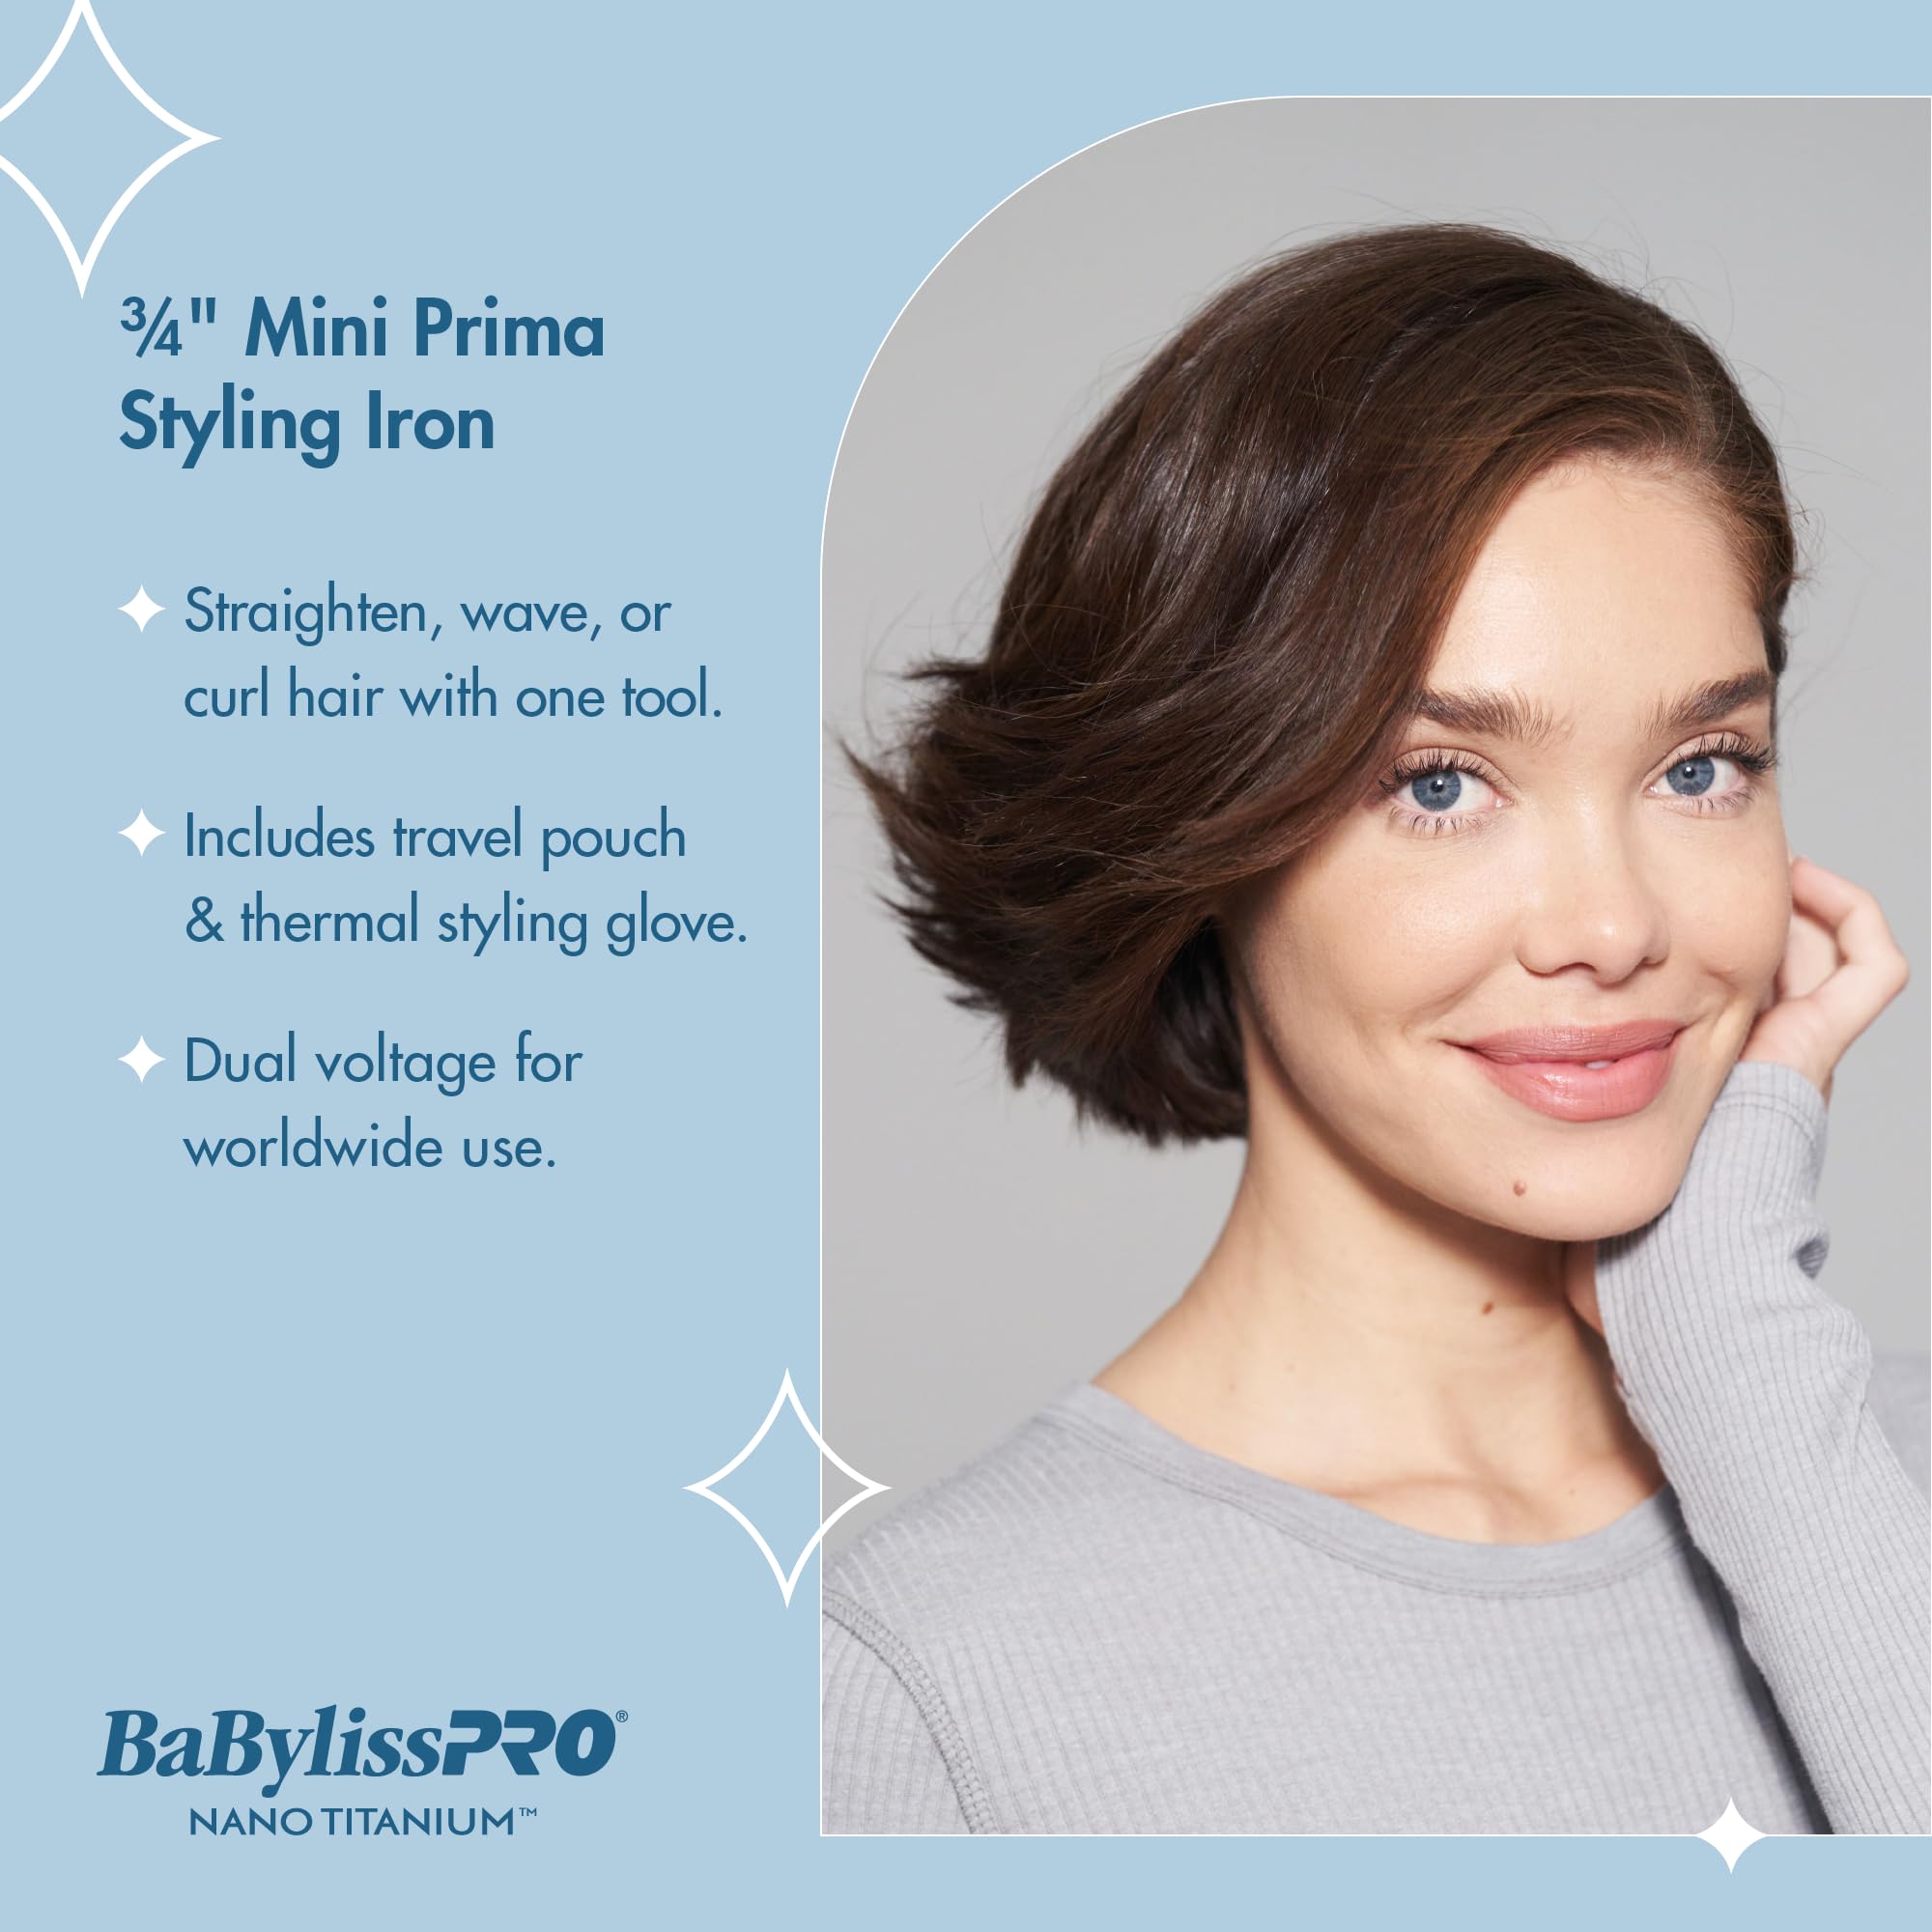 BaBylissPRO Nano Titanium Prima Ionic Hair Straightener, curl and straighten hair with one professional tool